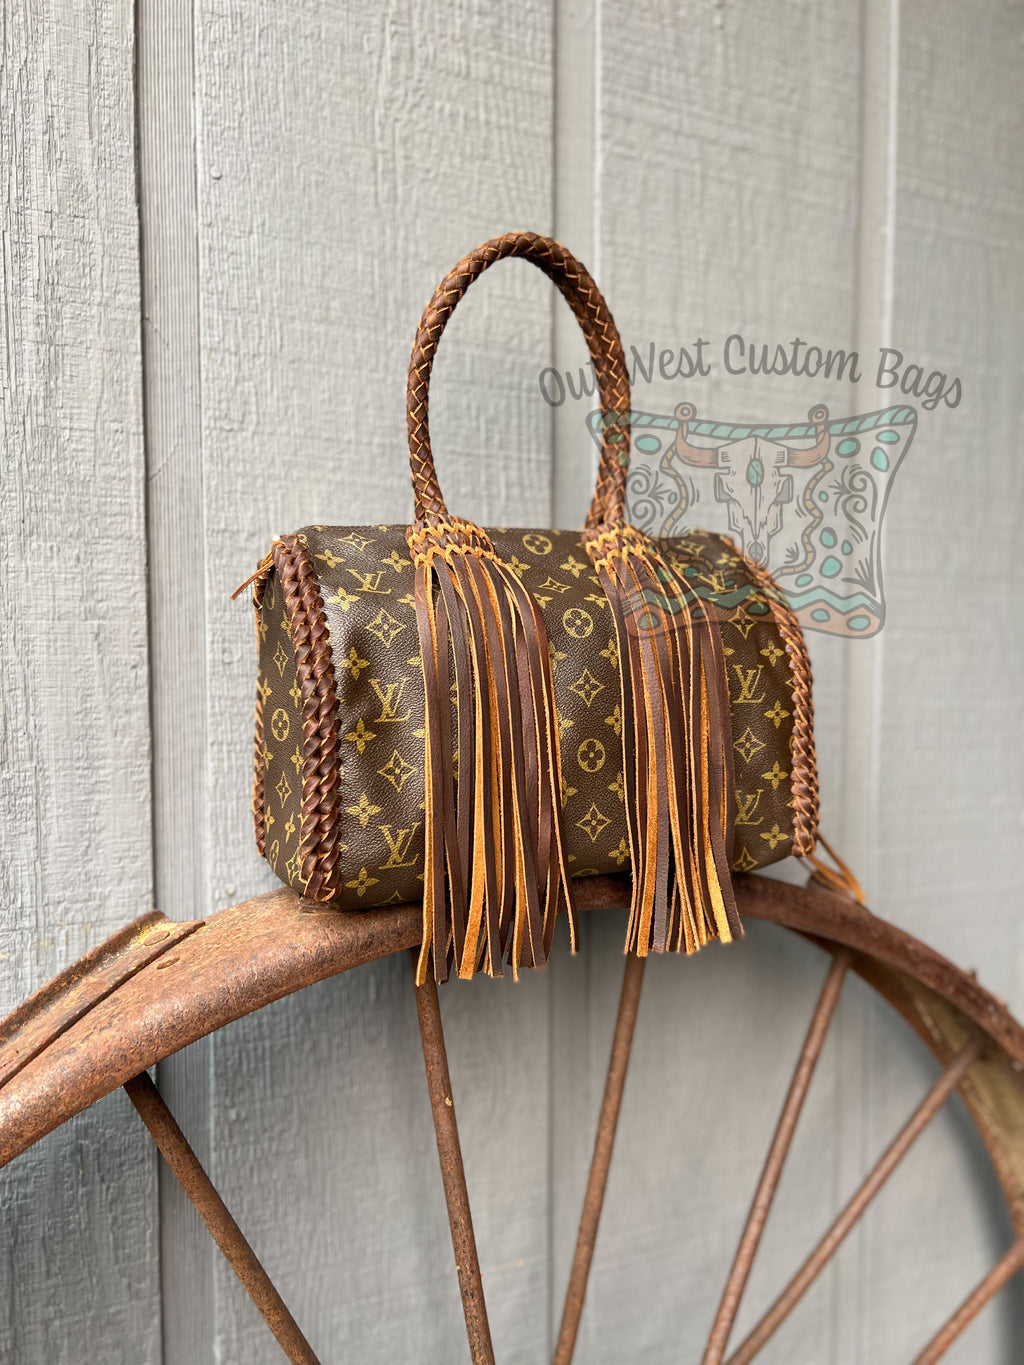 Out West Speedy 30 or 35 Revamped with Leather Braiding and Fringe